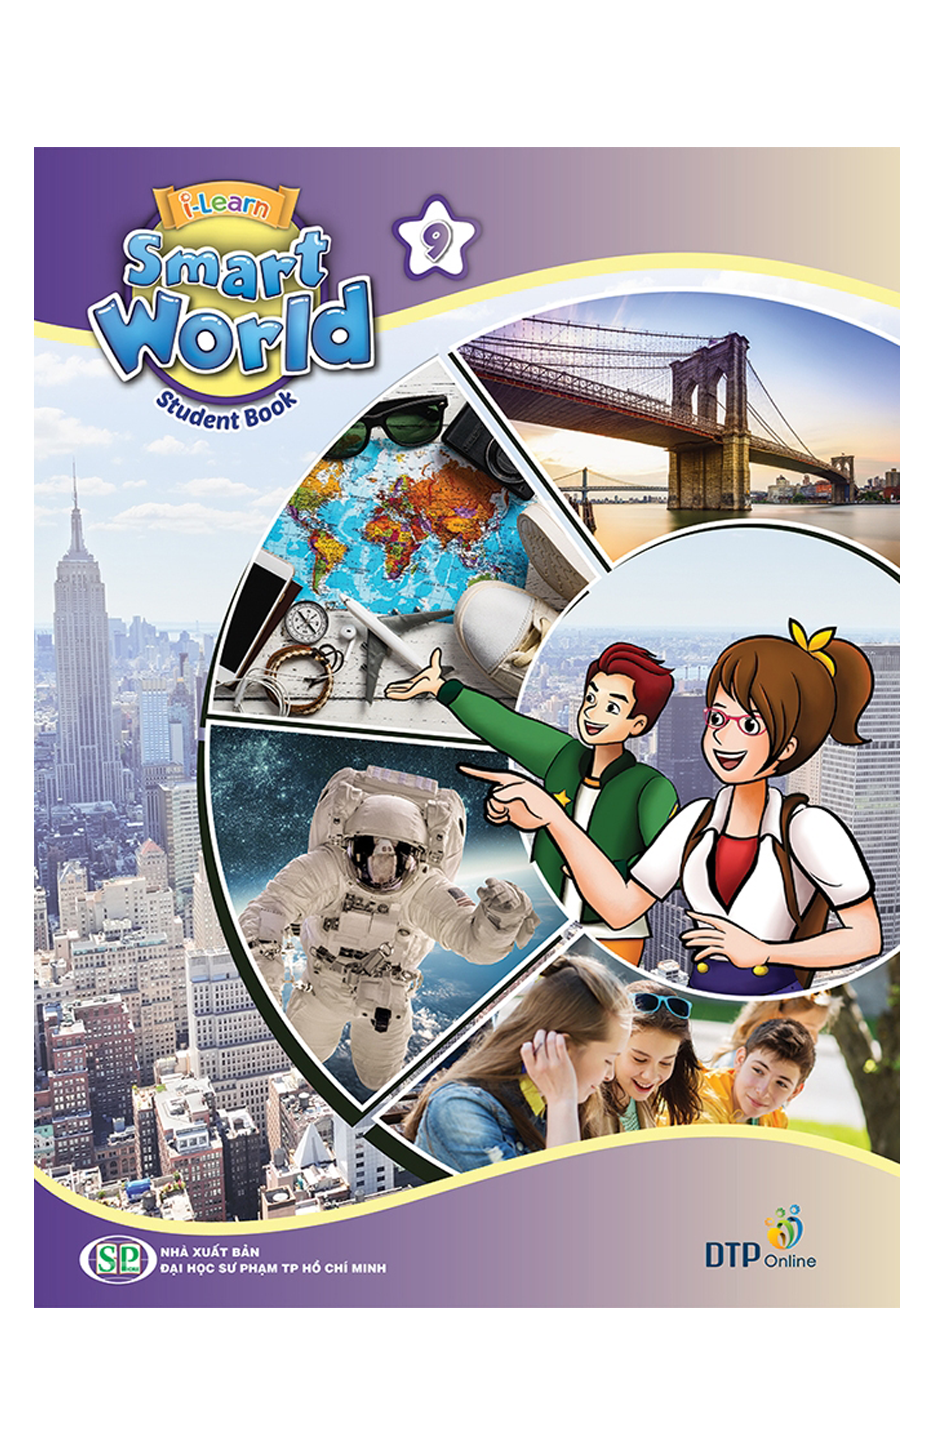 I-learn Smart World 9 Student Book.